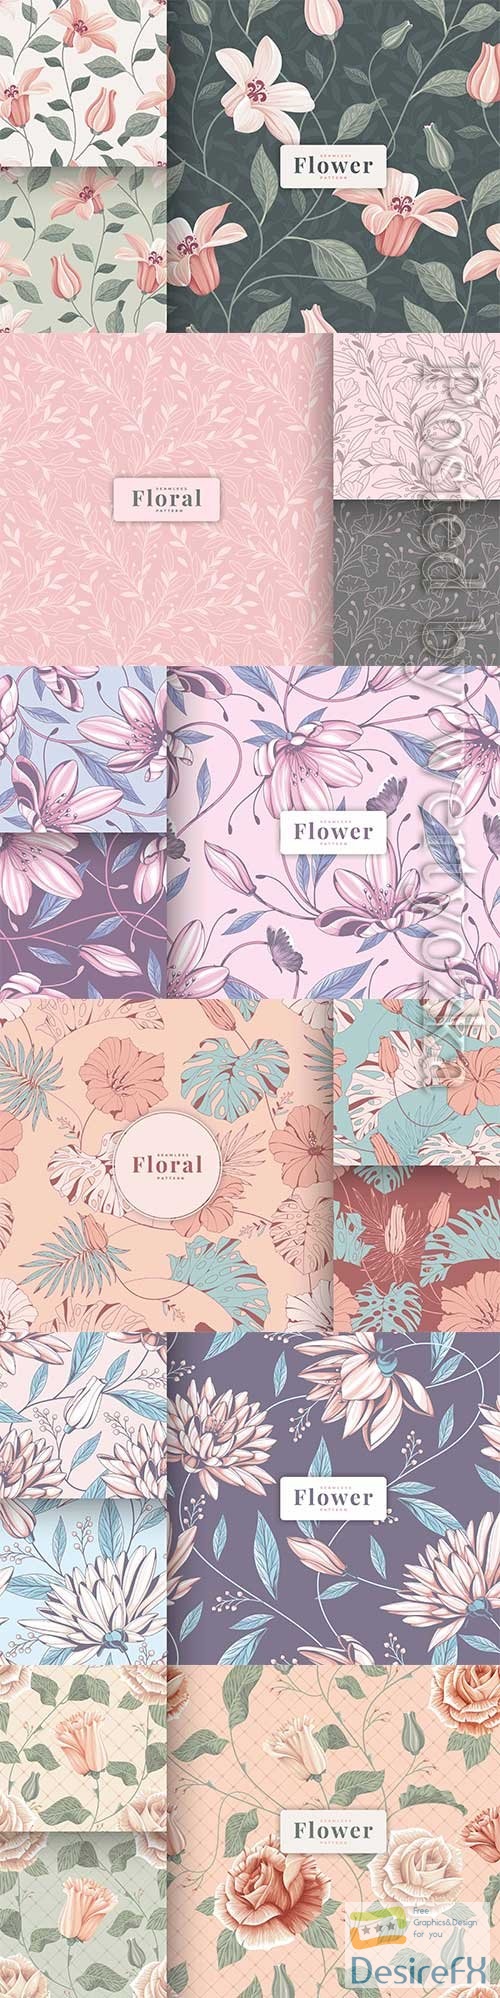 Colour hand drawn vintage floral seamless pattern